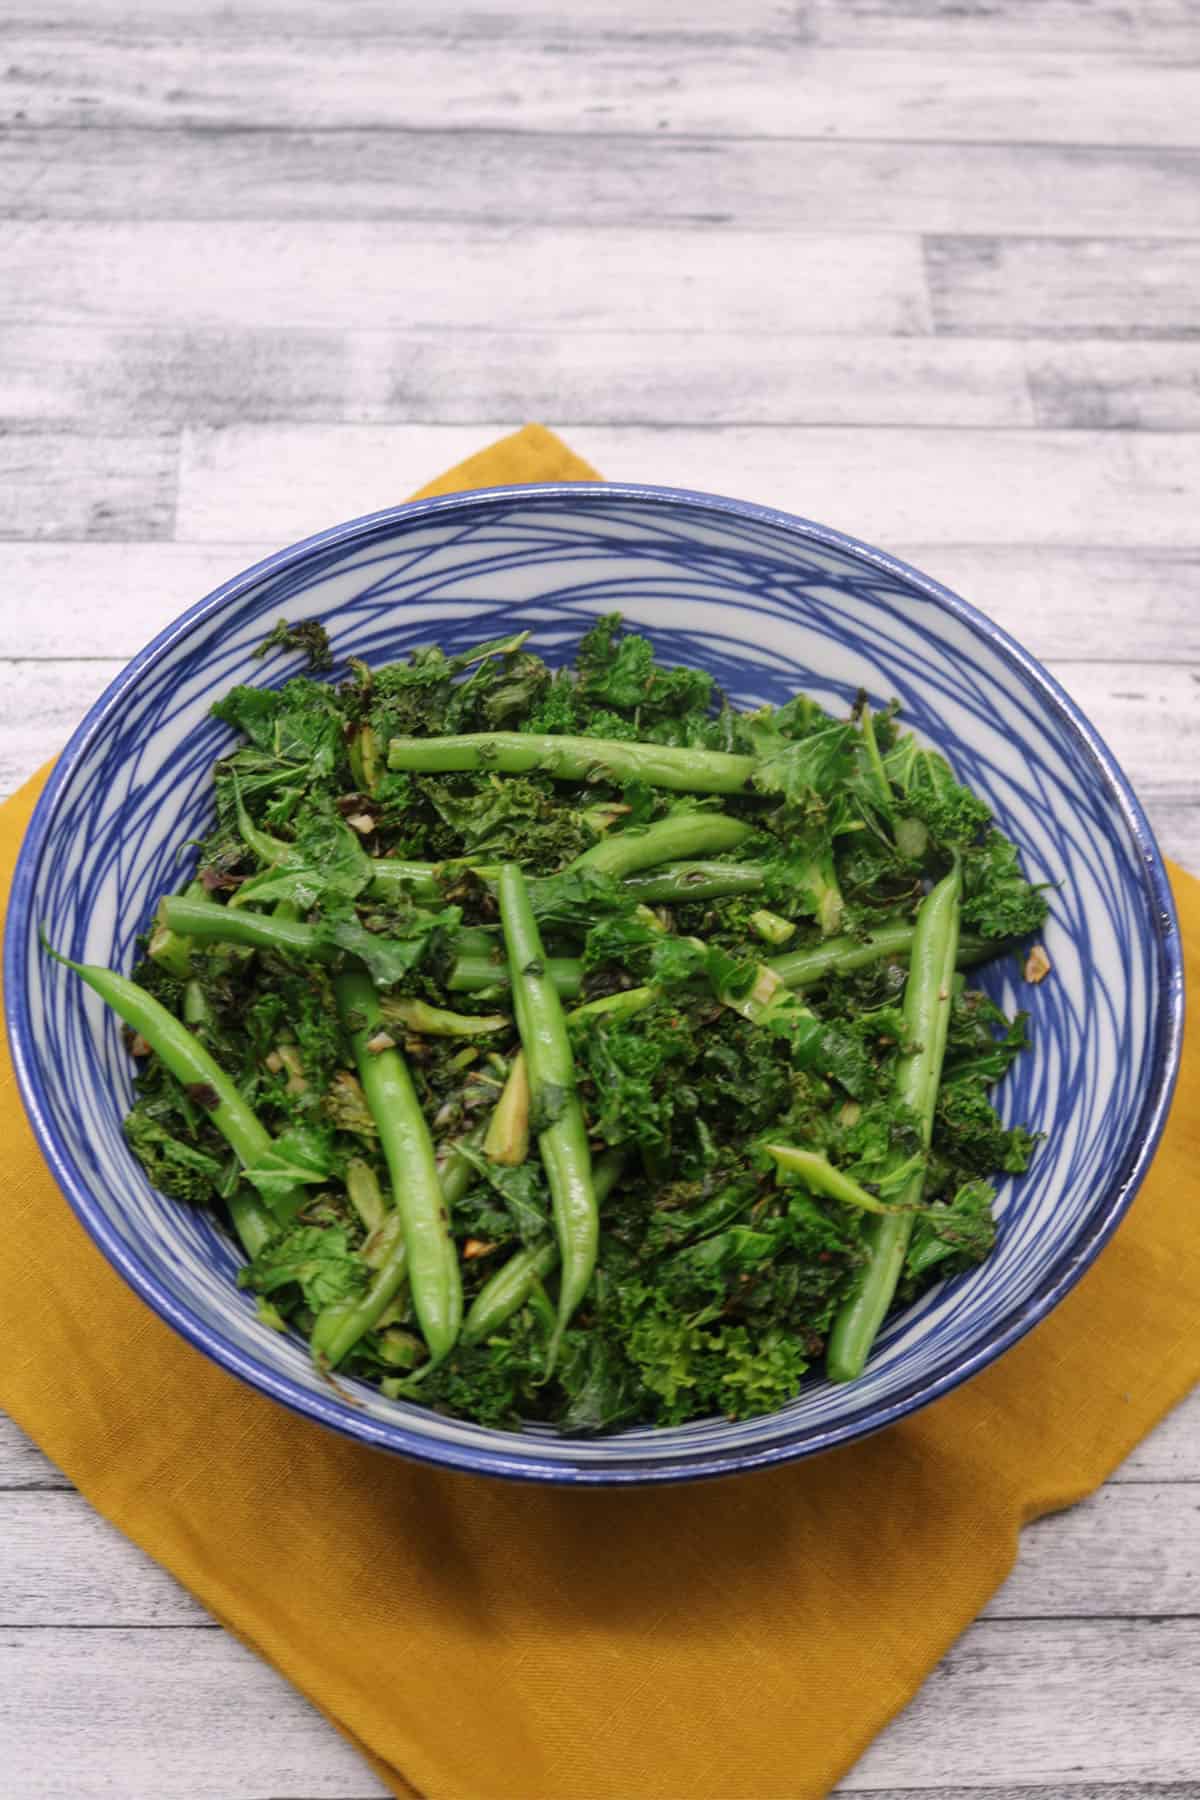 Sauteed kale and green beans in a blue and white bowl